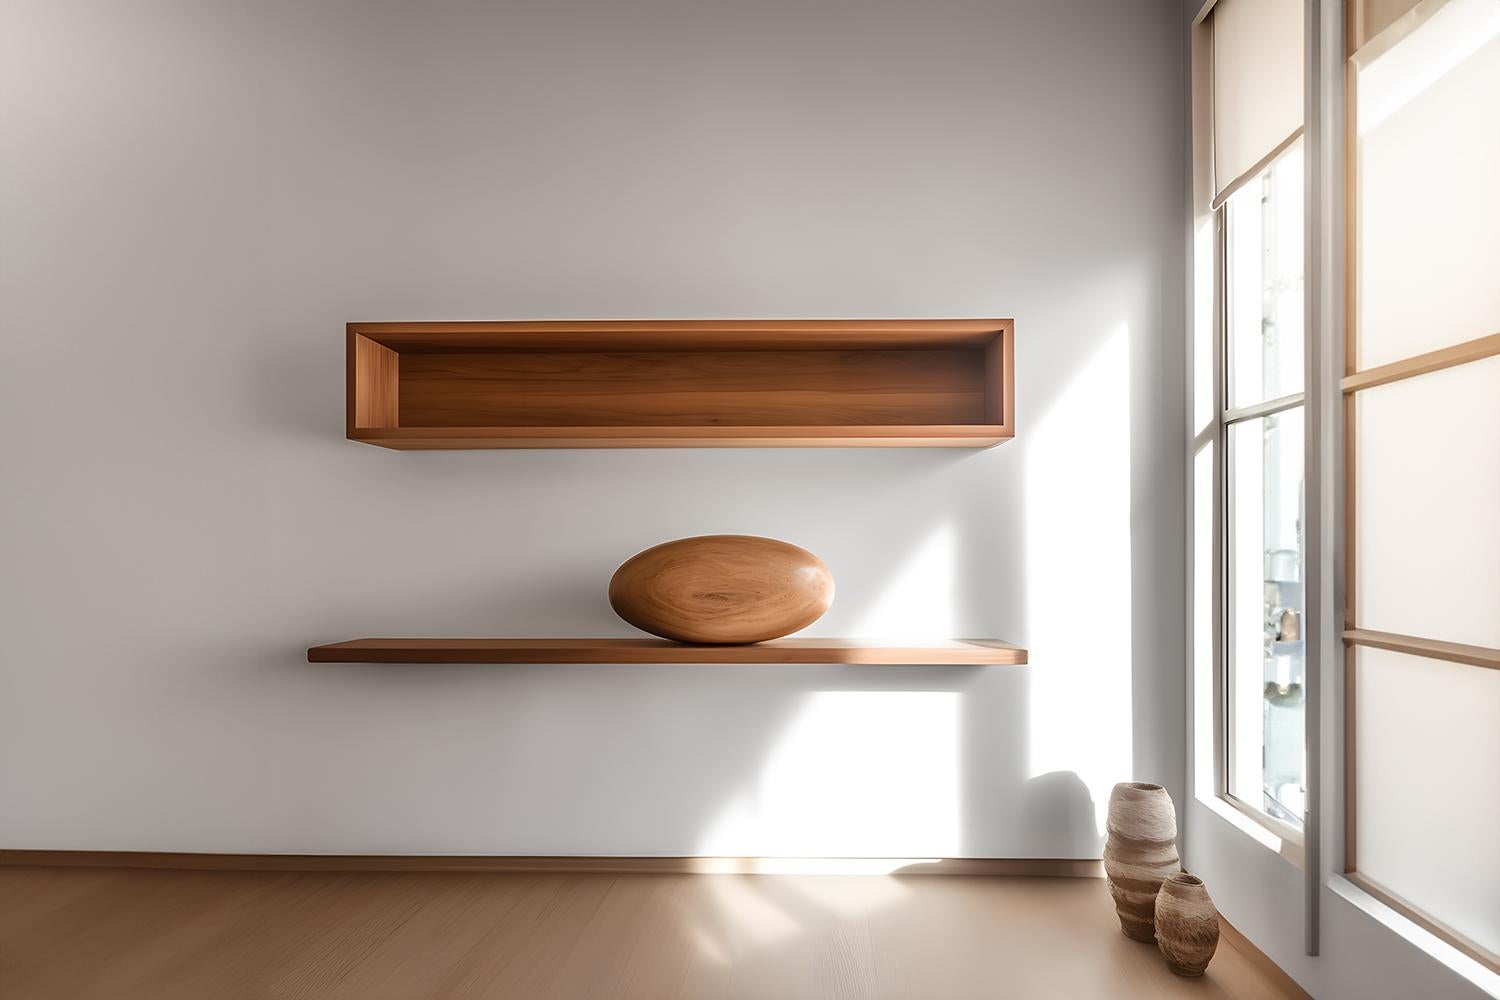 Large Sculptural Wooden Pebble Accent, Sereno by Joel Escalona



—

What happens when the practical becomes art?
What happens when ornamentation gains significance?

Those were the questions Joel Escalona asked himself when he designed the